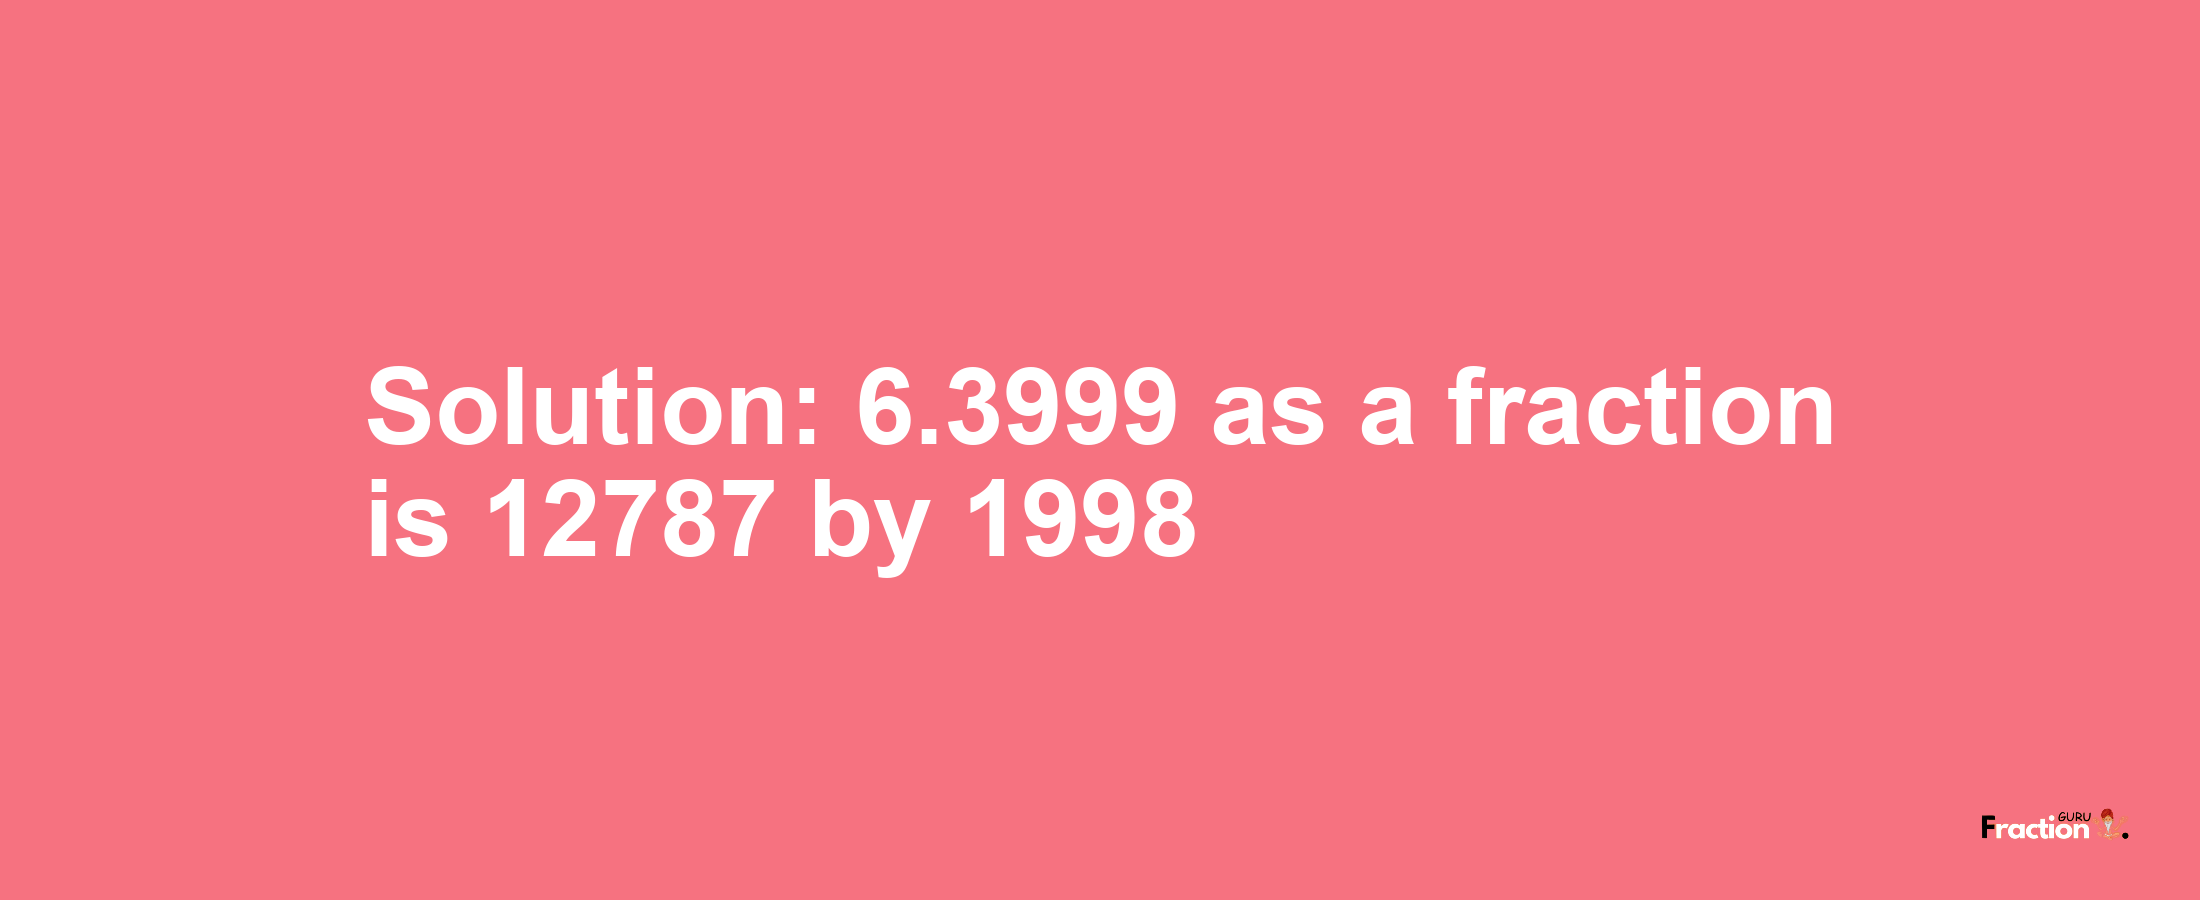 Solution:6.3999 as a fraction is 12787/1998